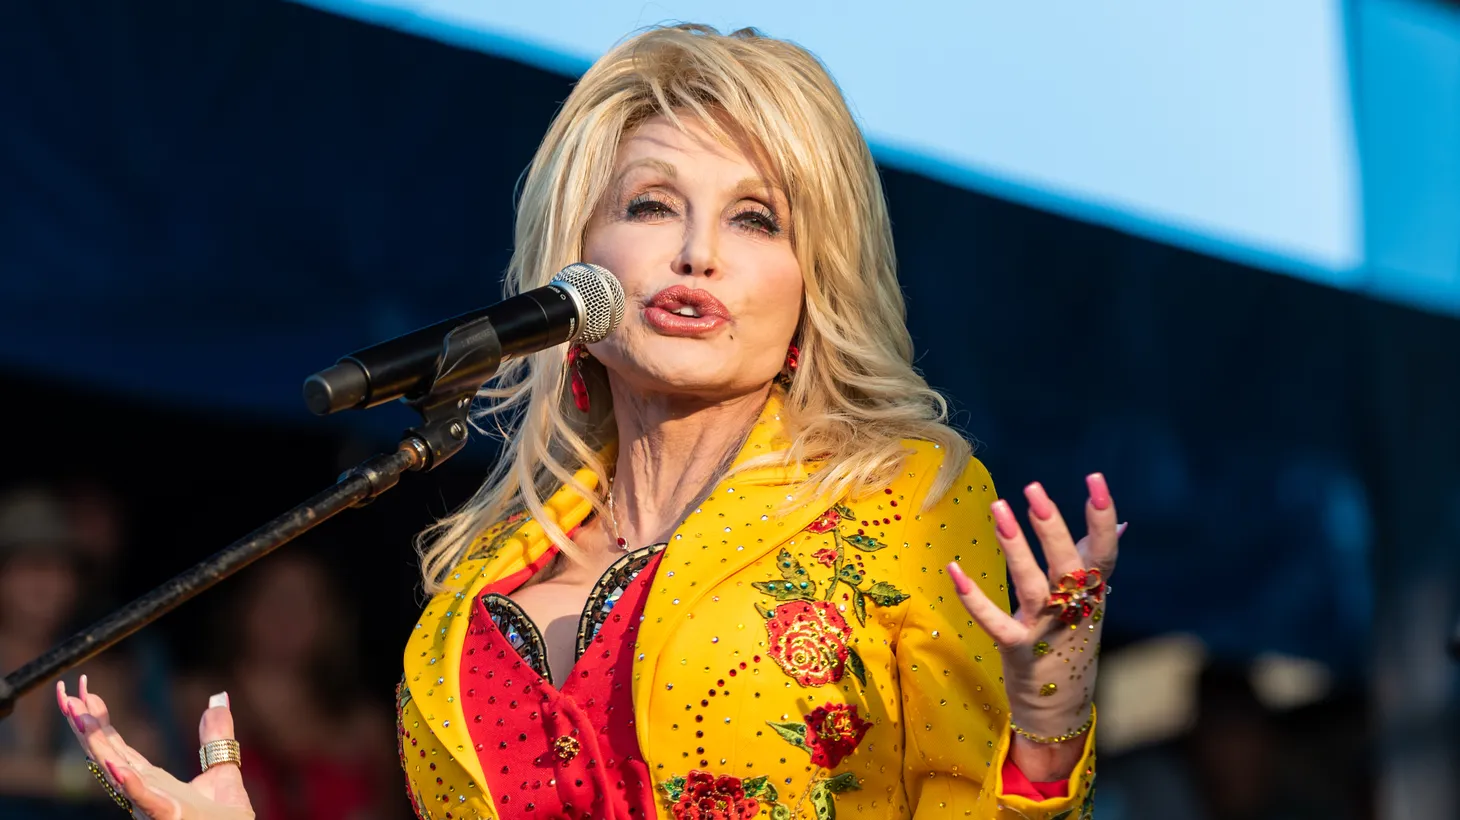 Dolly Parton performs at The Newport Folk Festival in Rhode Island, July 27, 2019.